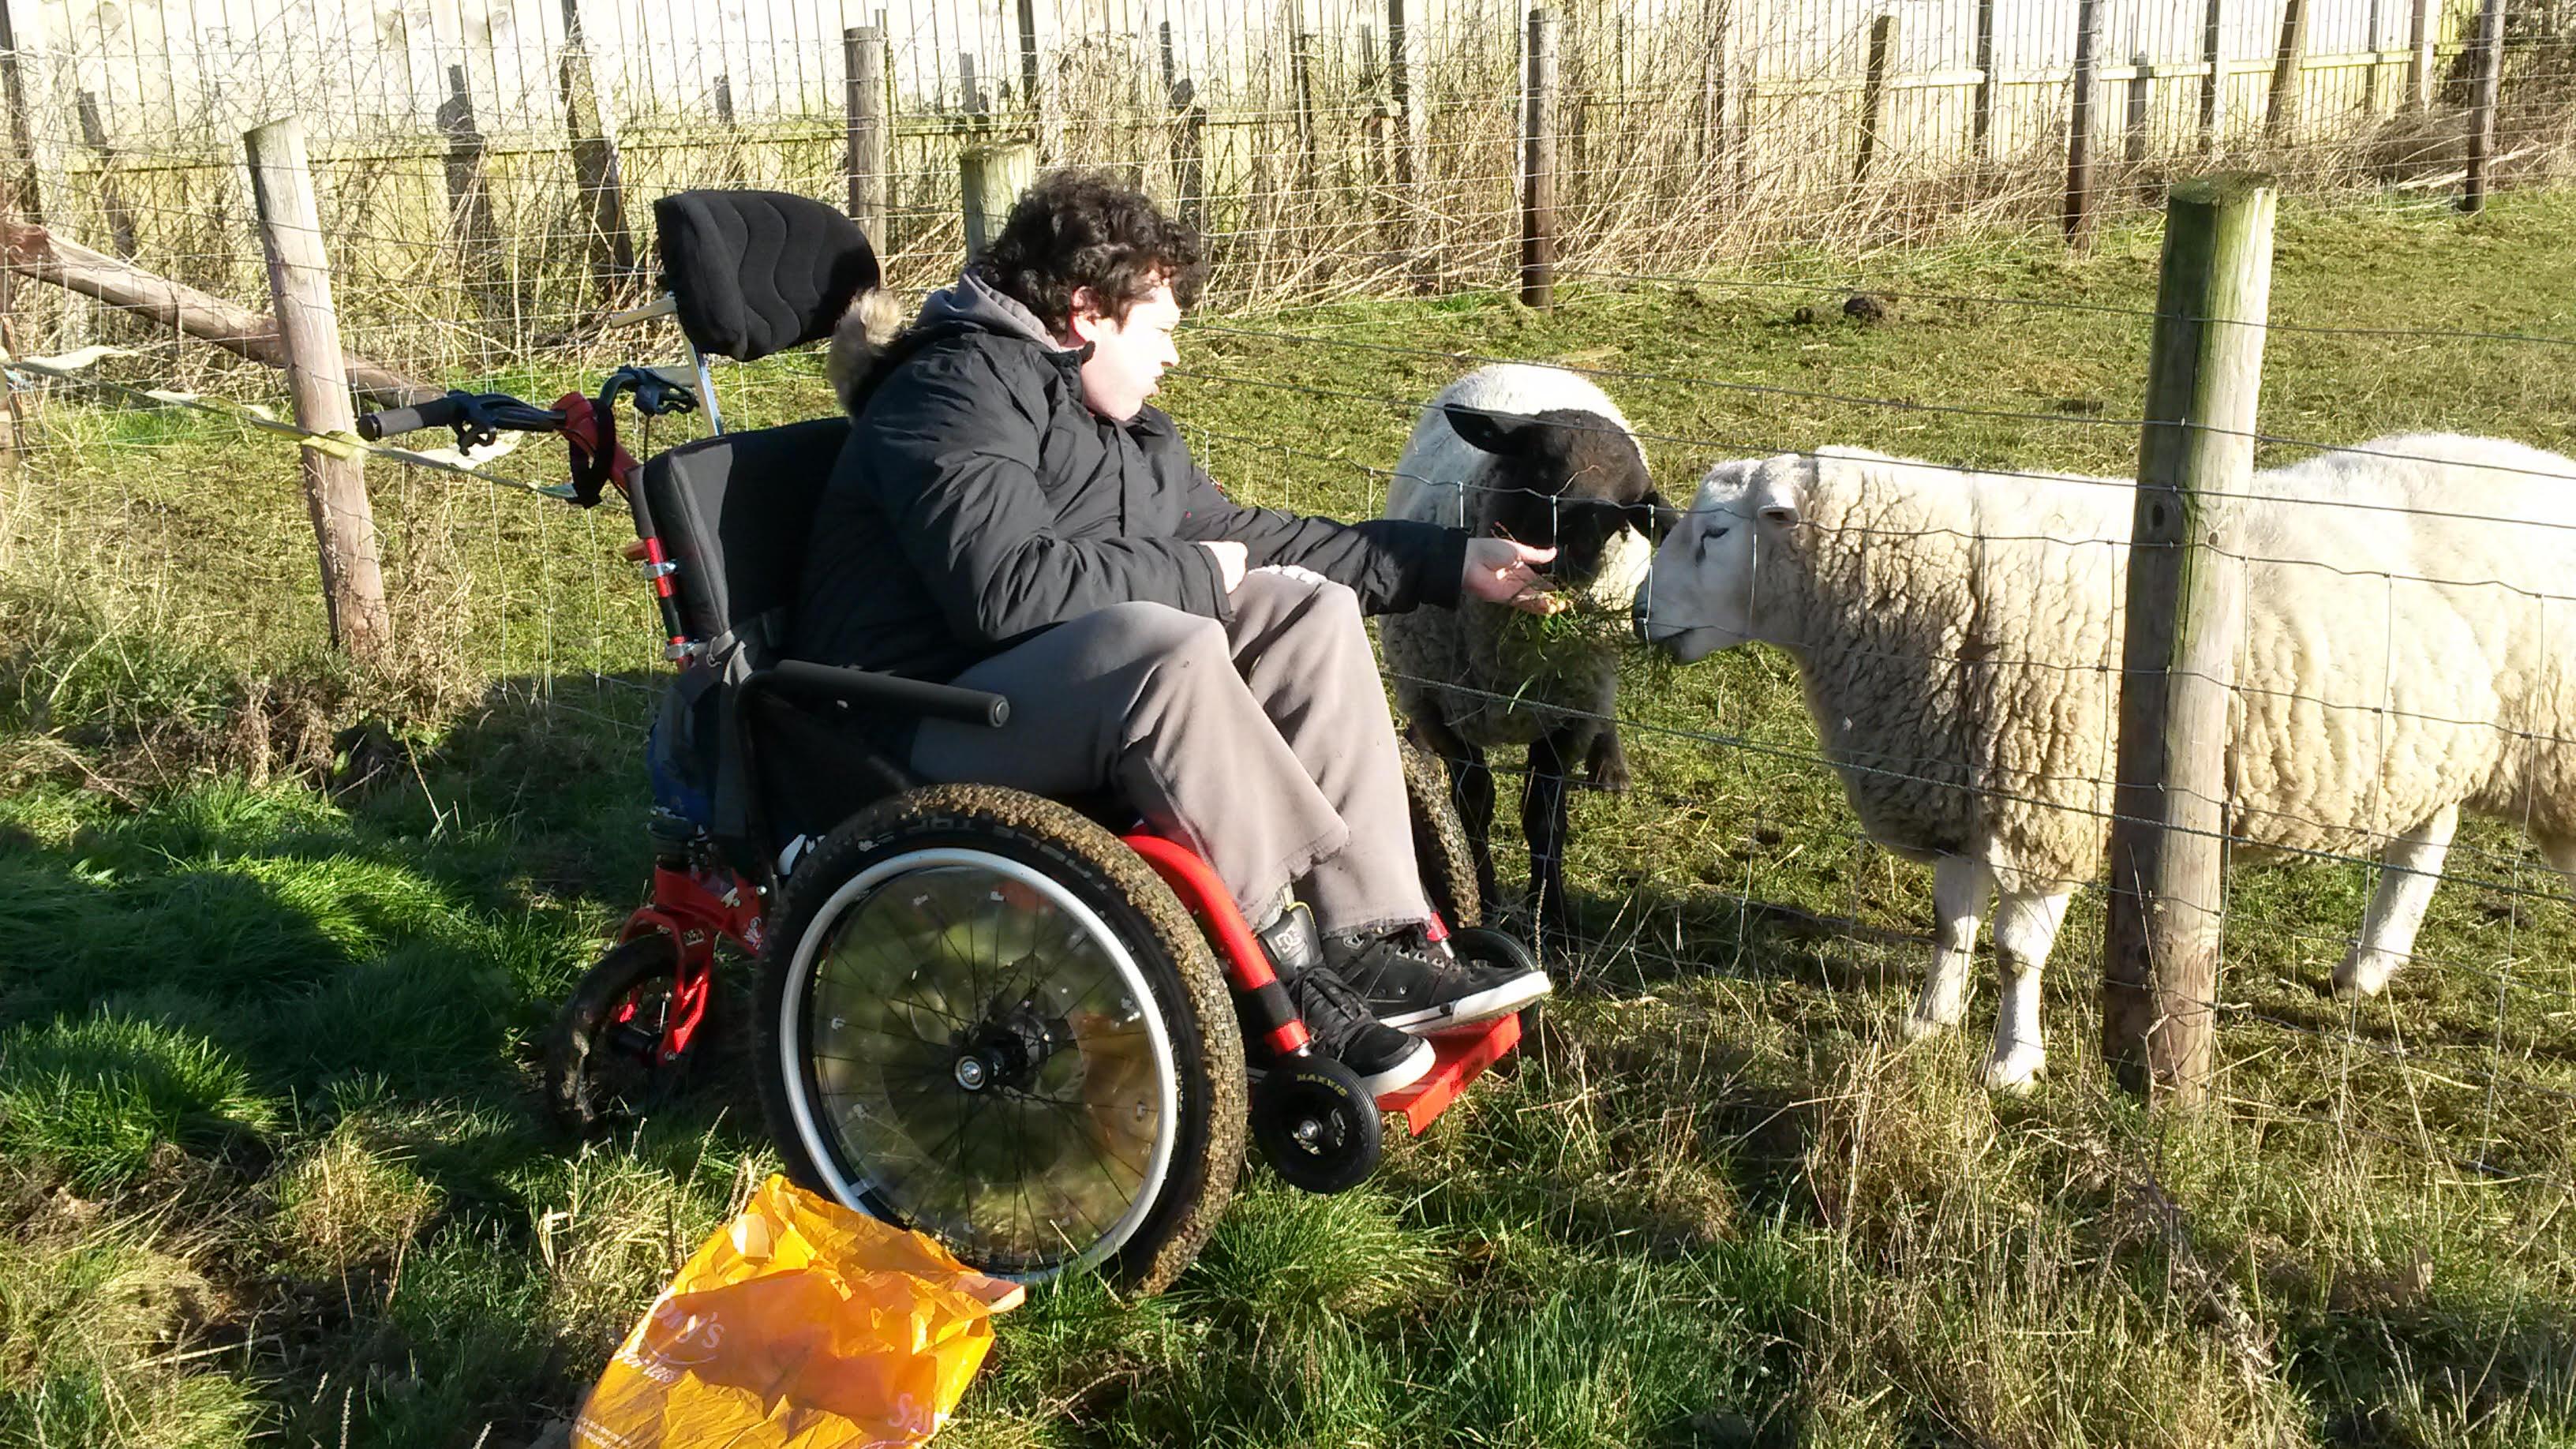 Joby can enjoy the farm thanks to his all terrain attendant wheelchair - the MT Push